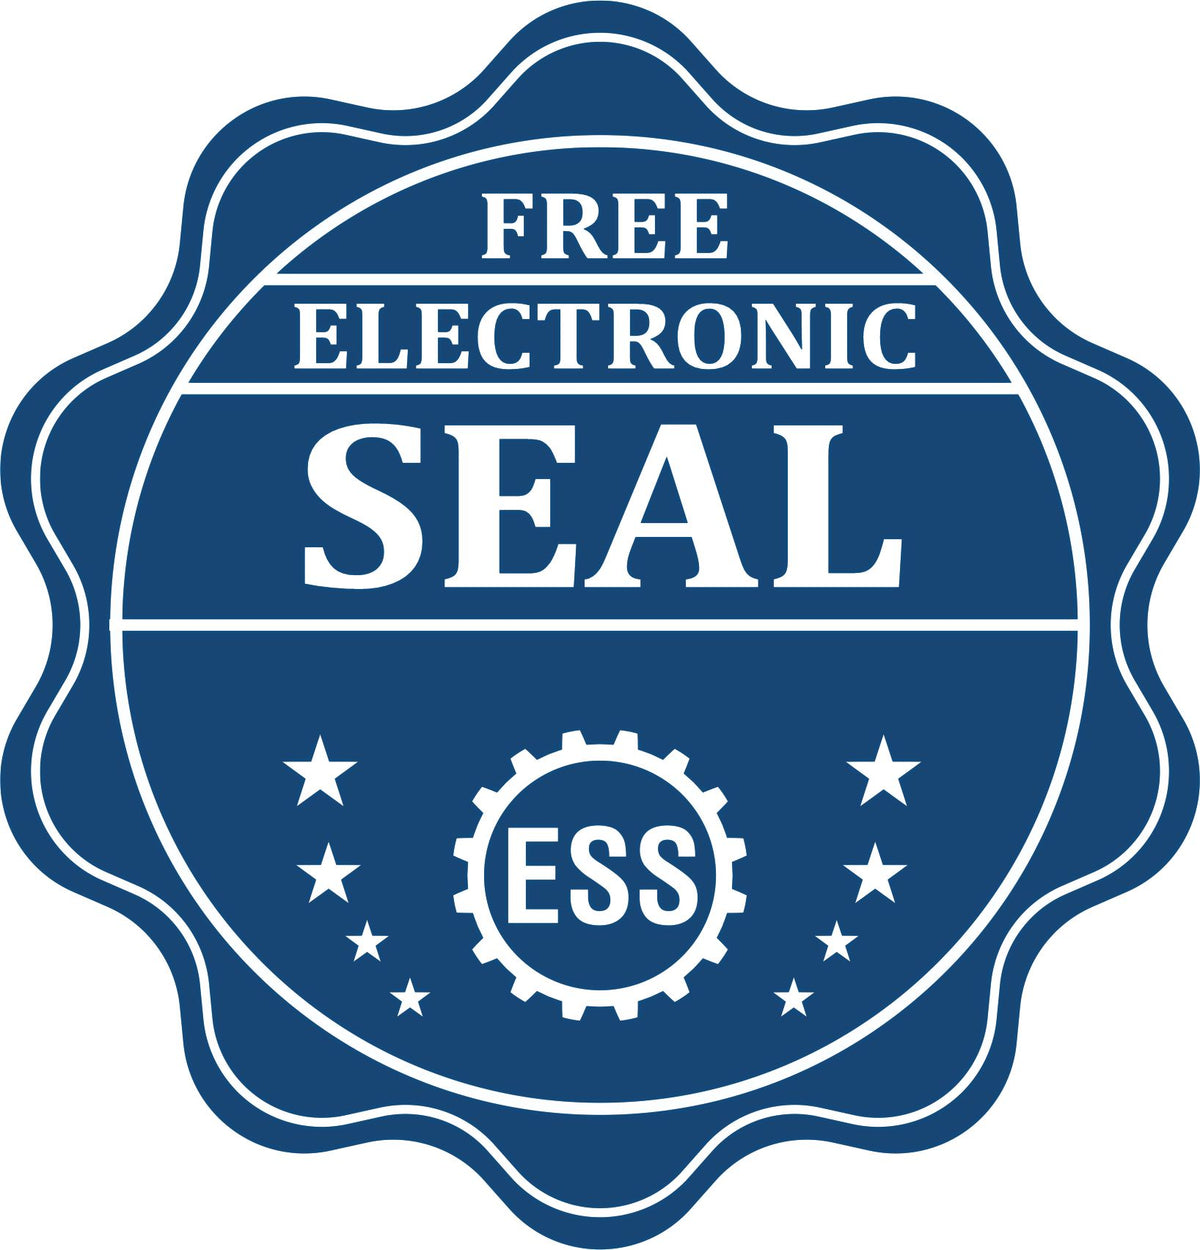 A badge showing a free electronic seal for the Guam Engineer Desk Seal with stars and the ESS gear on the emblem.